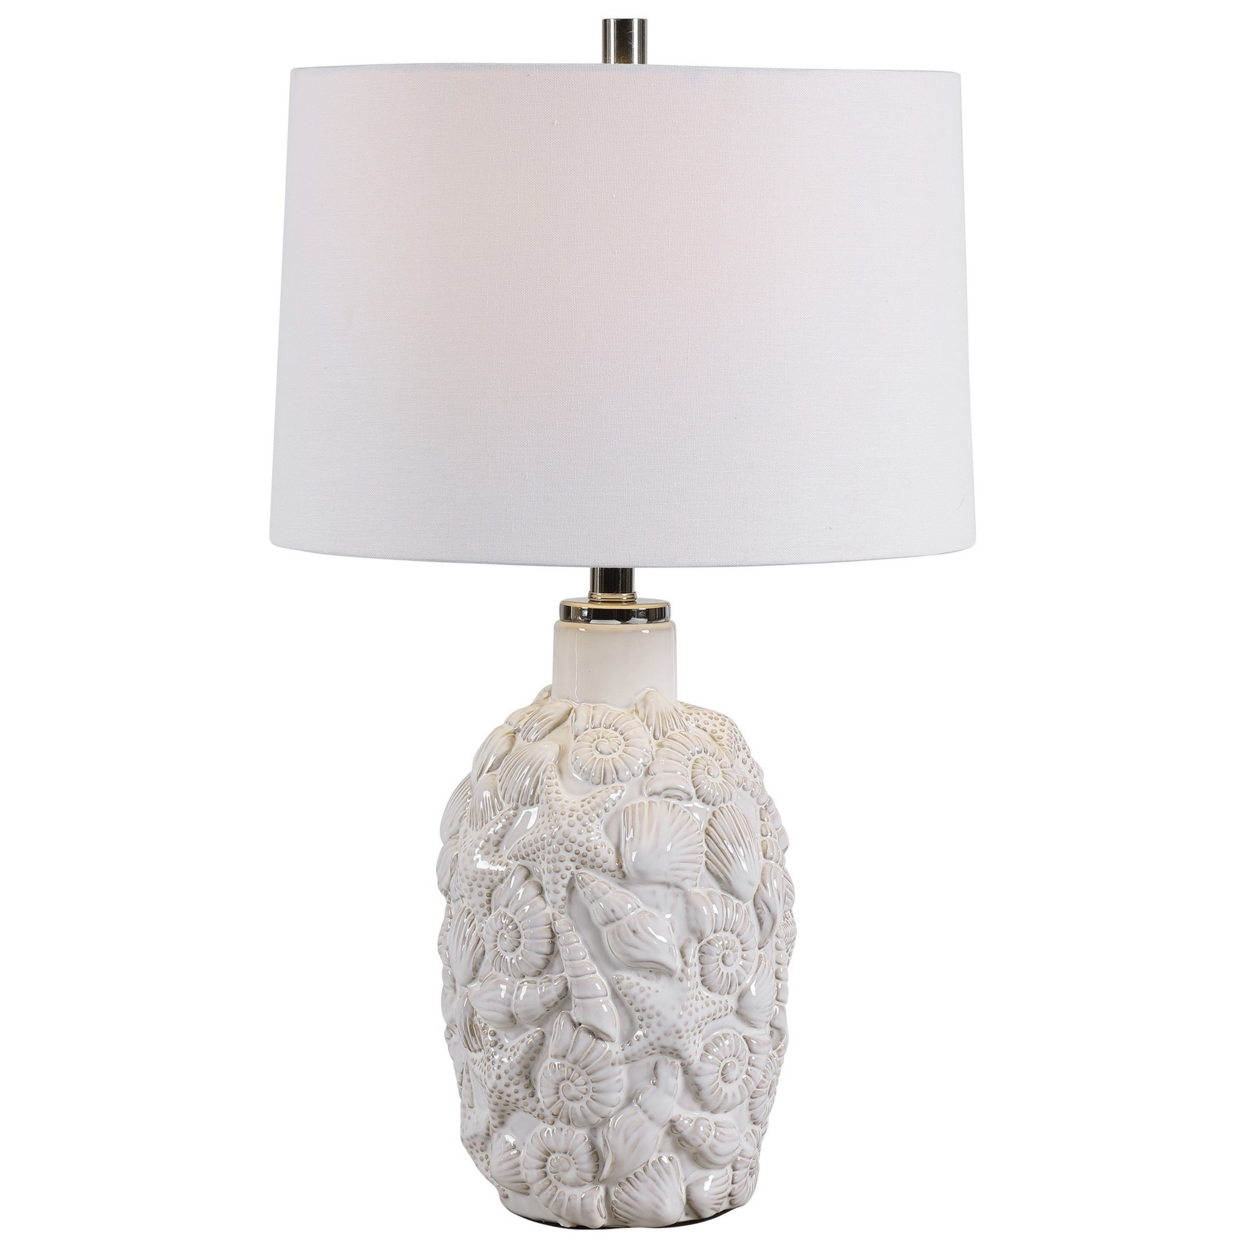 Bellied Shape Ceramic Table Lamp with Starfish and Sea Shell Carving,White- Saltoro Sherpi